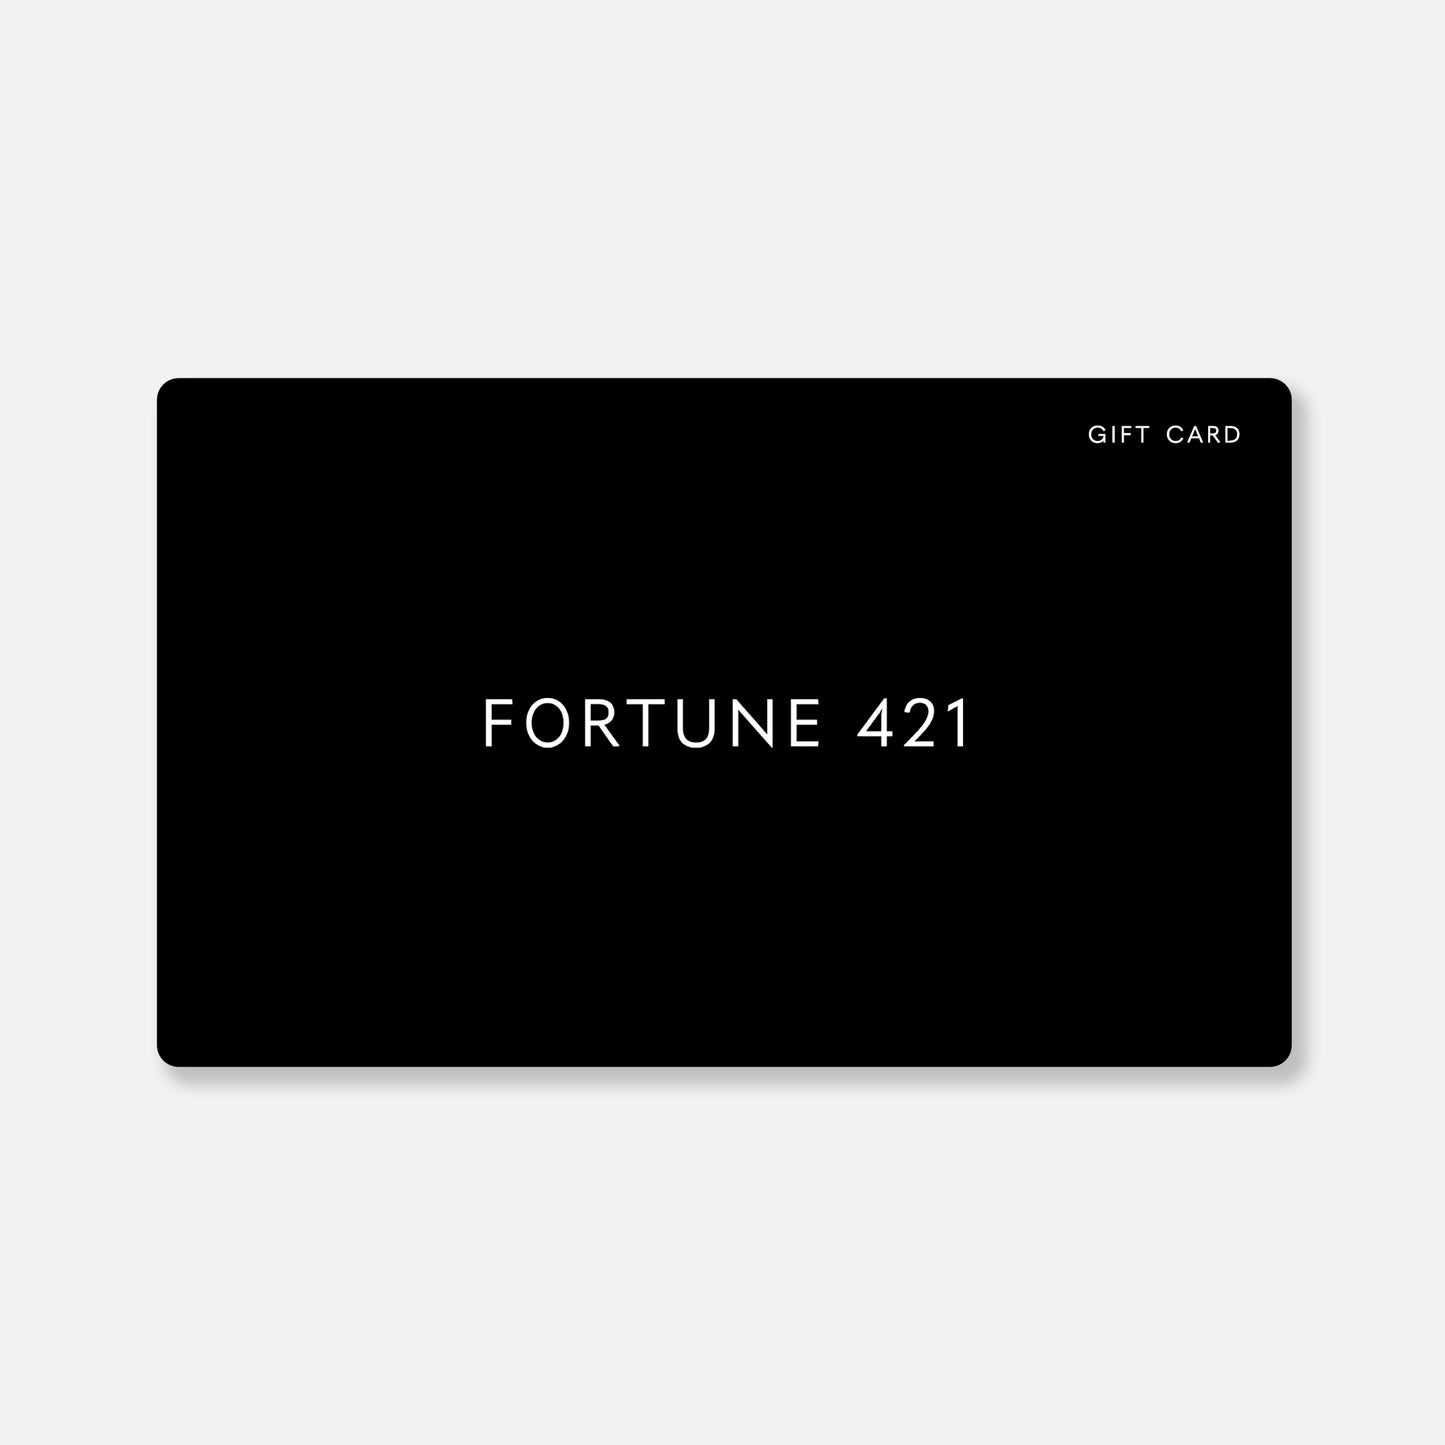 Fortune 421 Gift Card